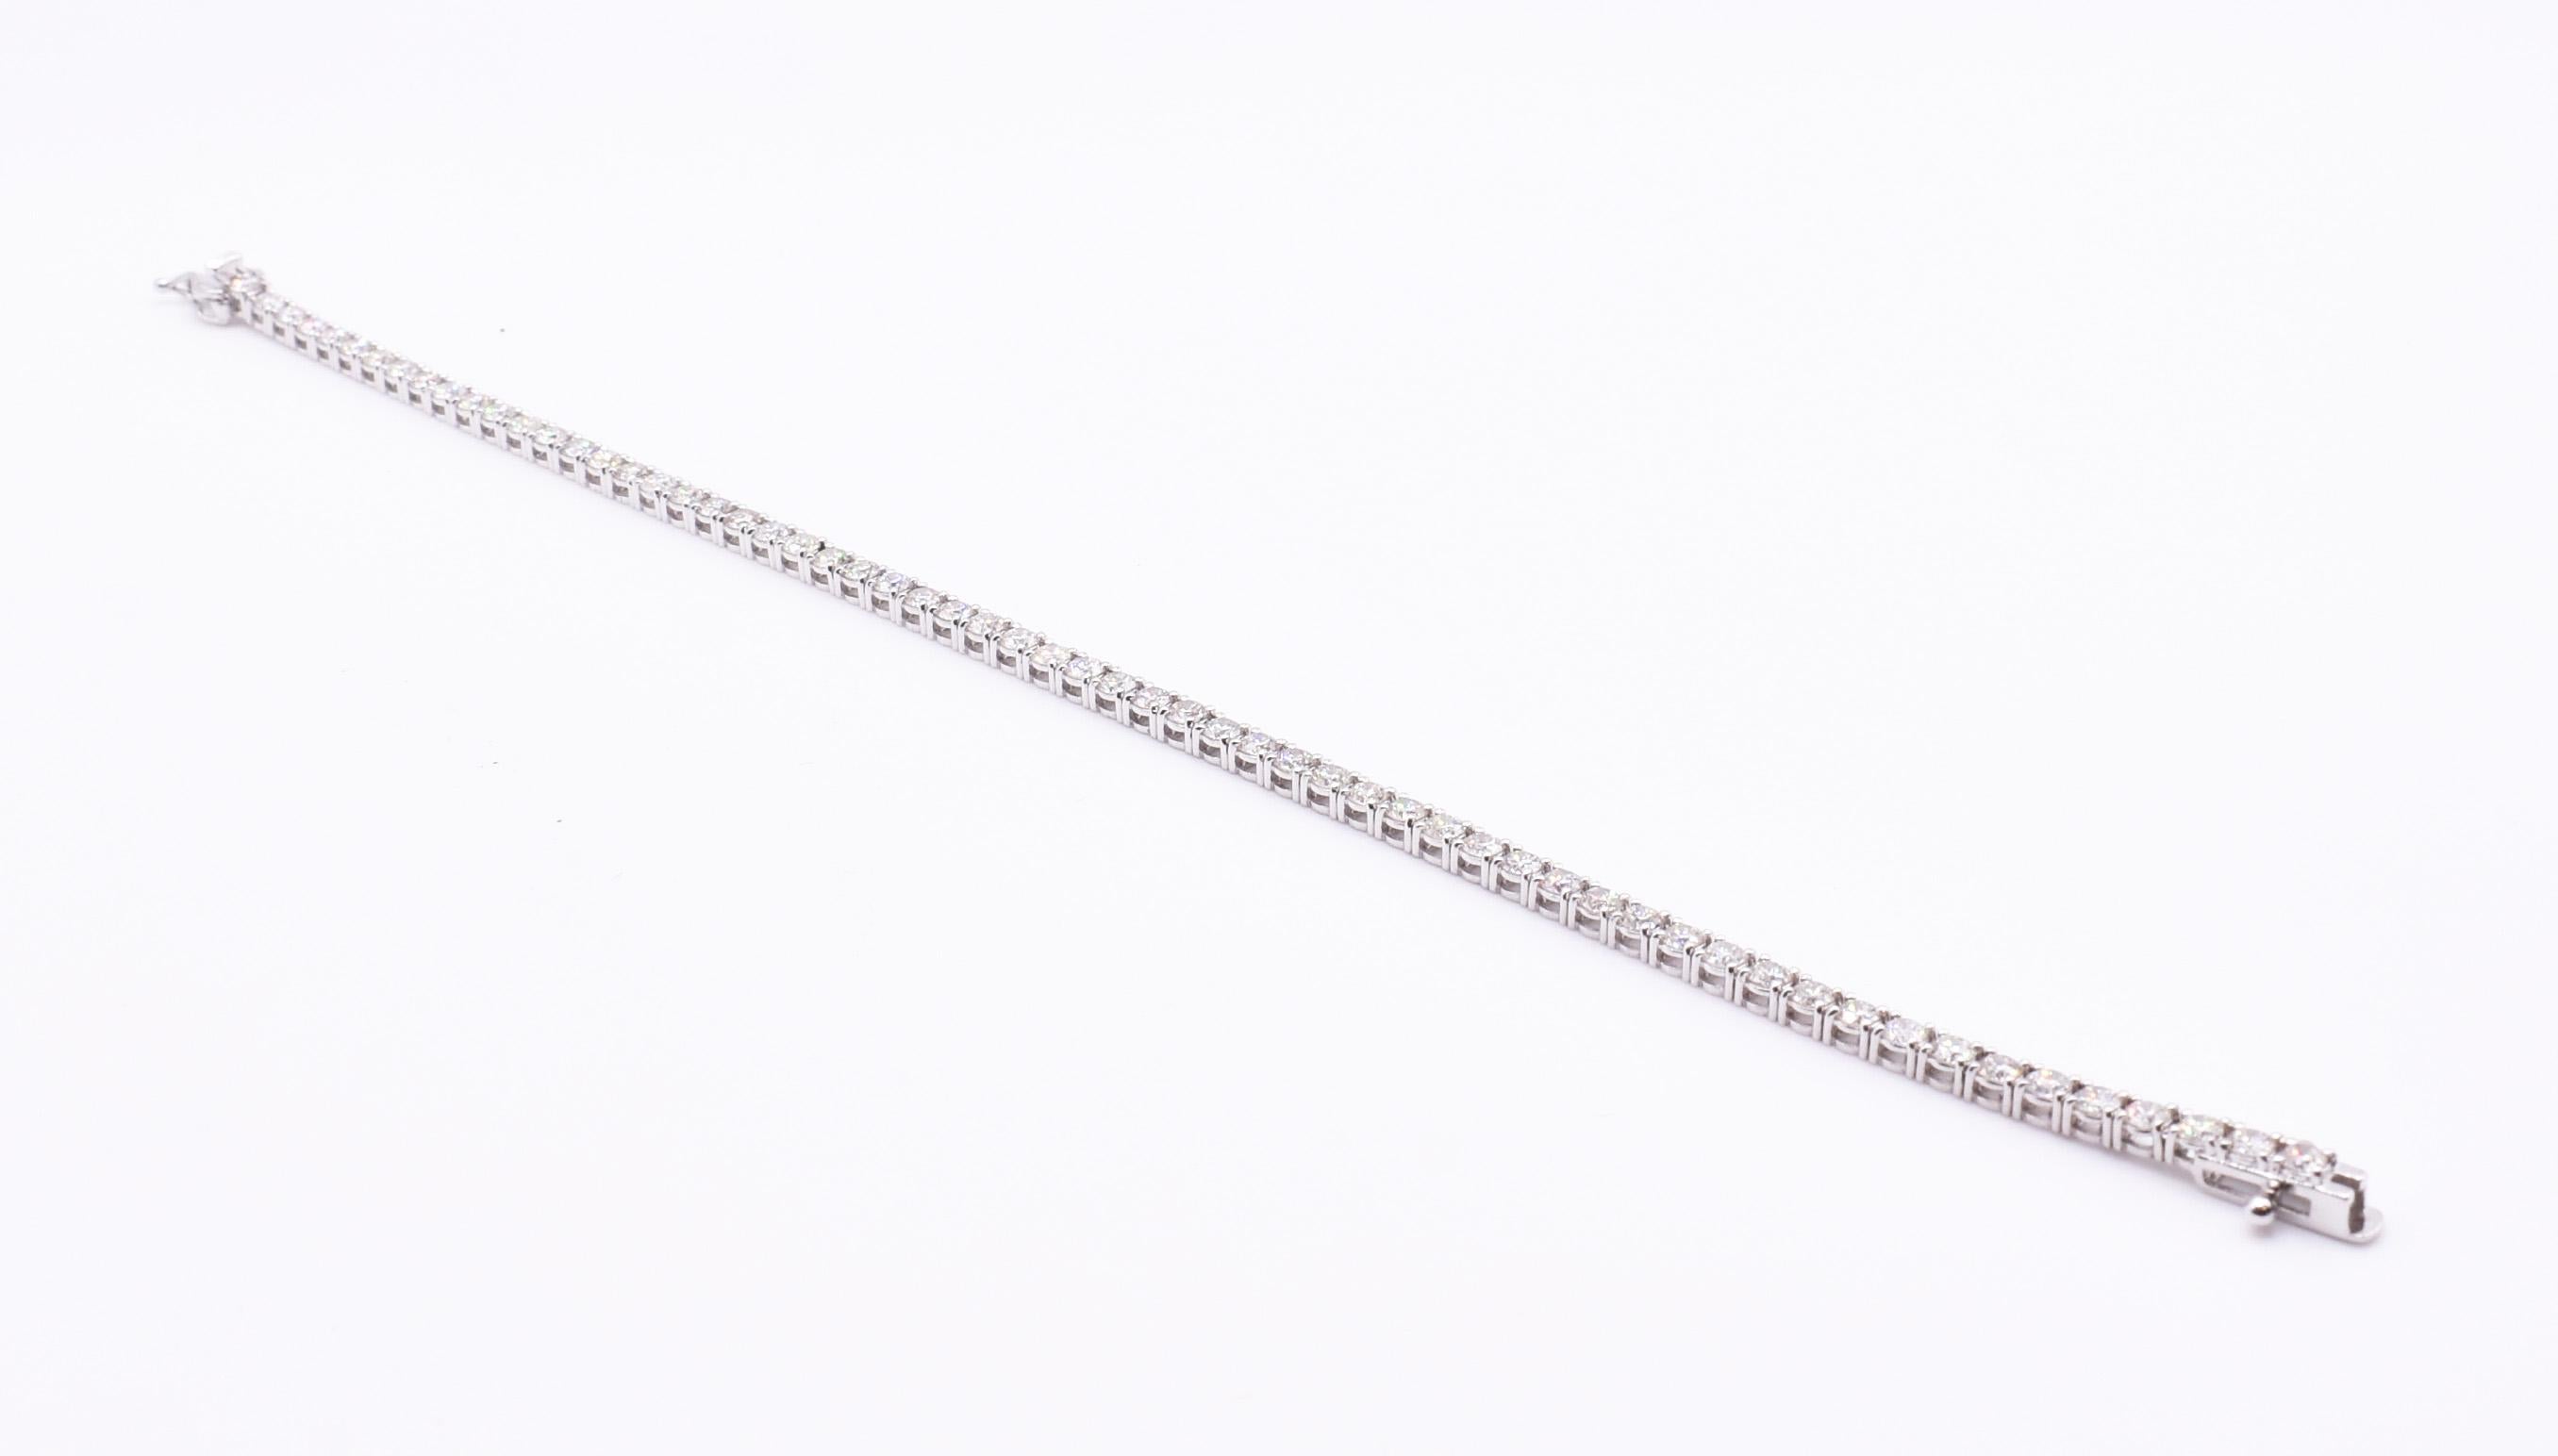 On offer for sale is a superb 18k white gold diamond tennis bracelet, having 72 round cut diamonds, with a total weight of 3.57ct. 

Length: 7